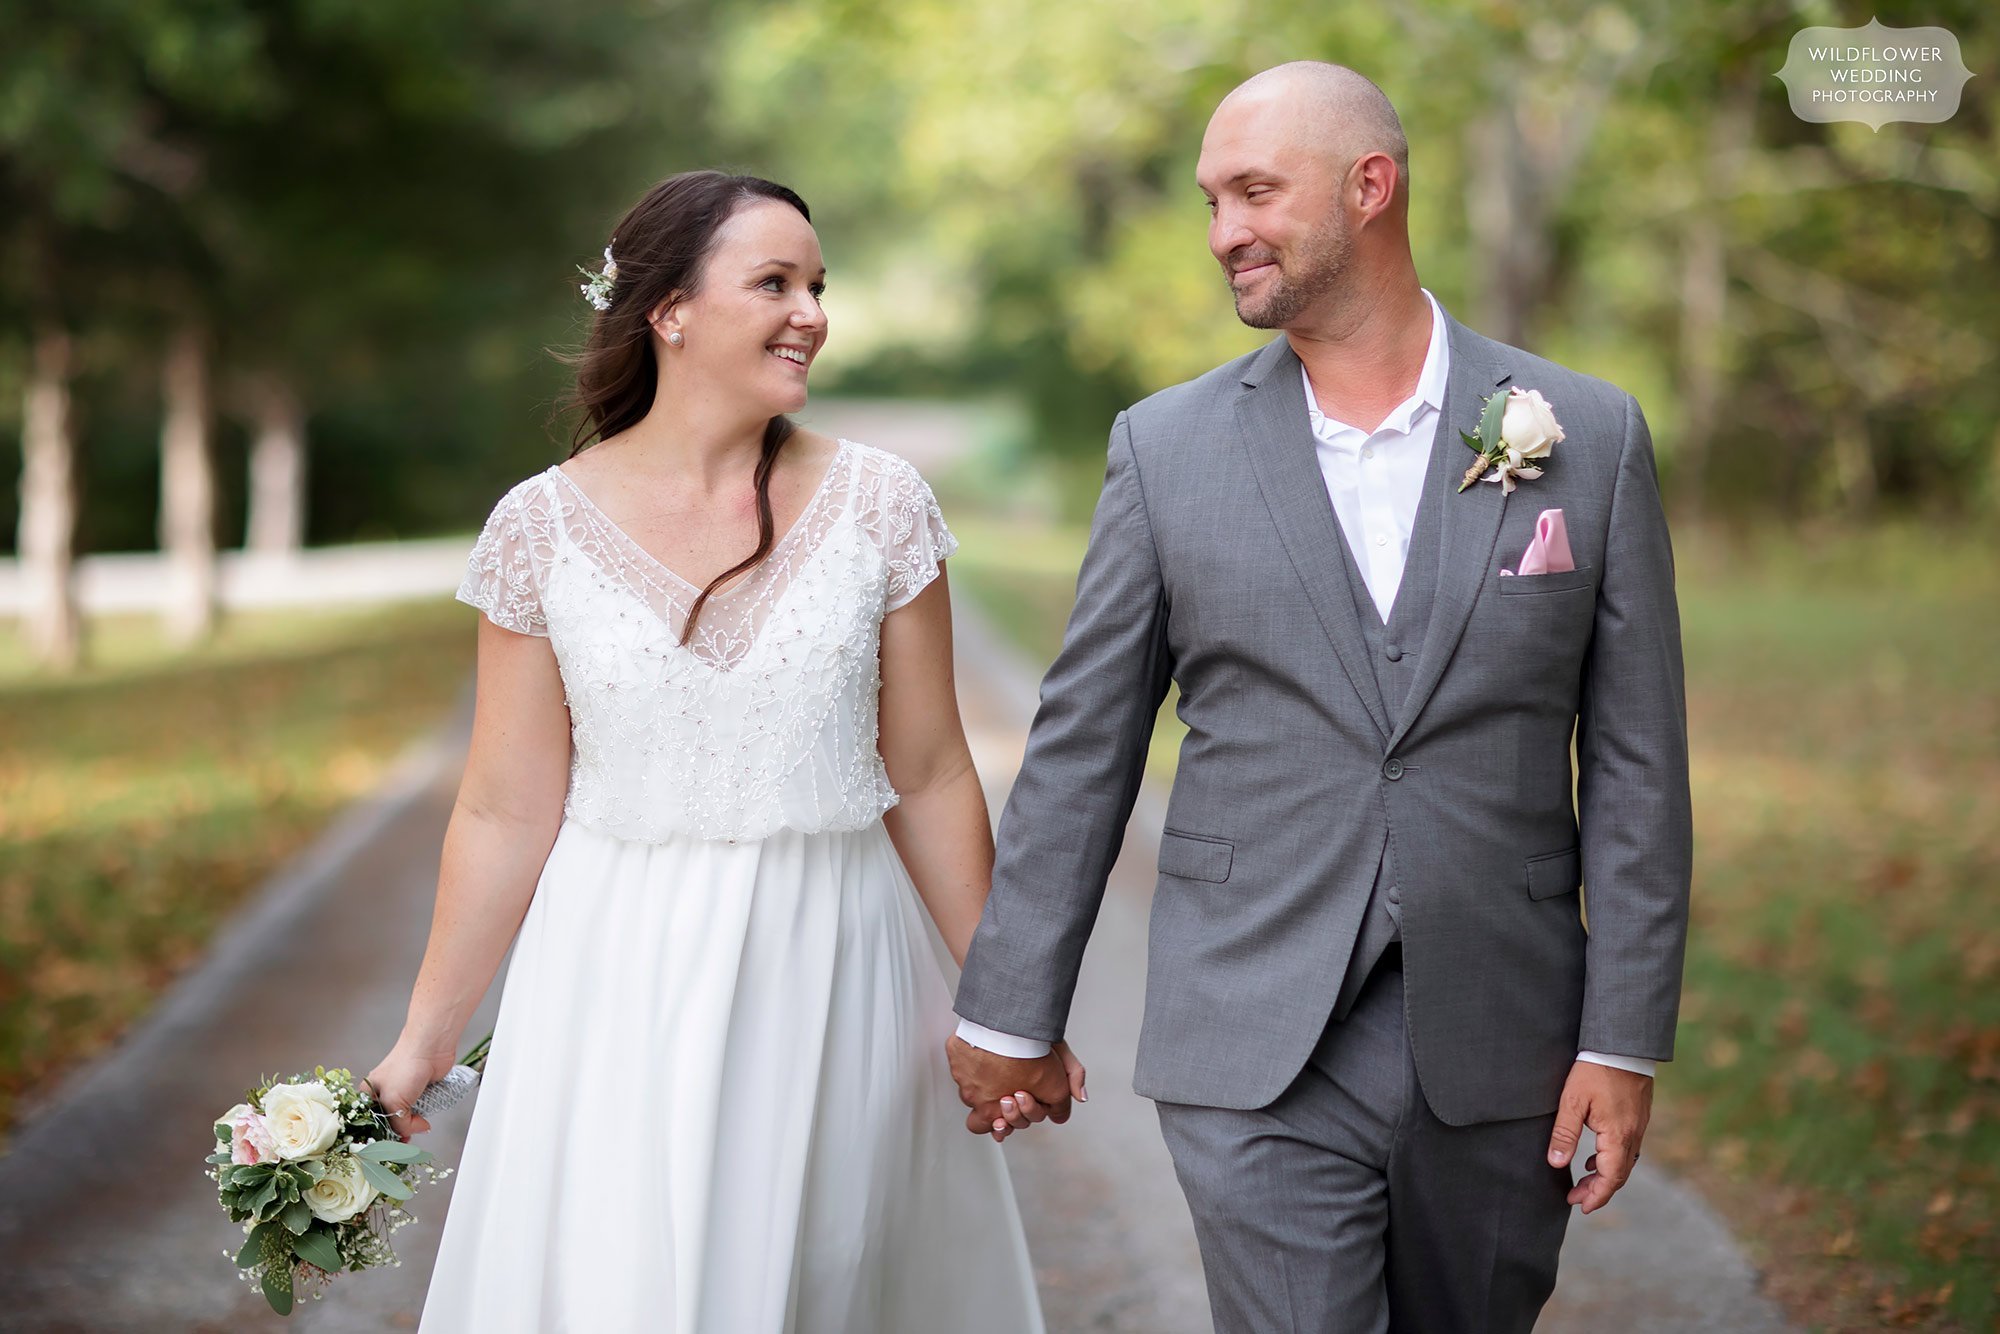 Bride and groom hold hands and walk down gravel road.